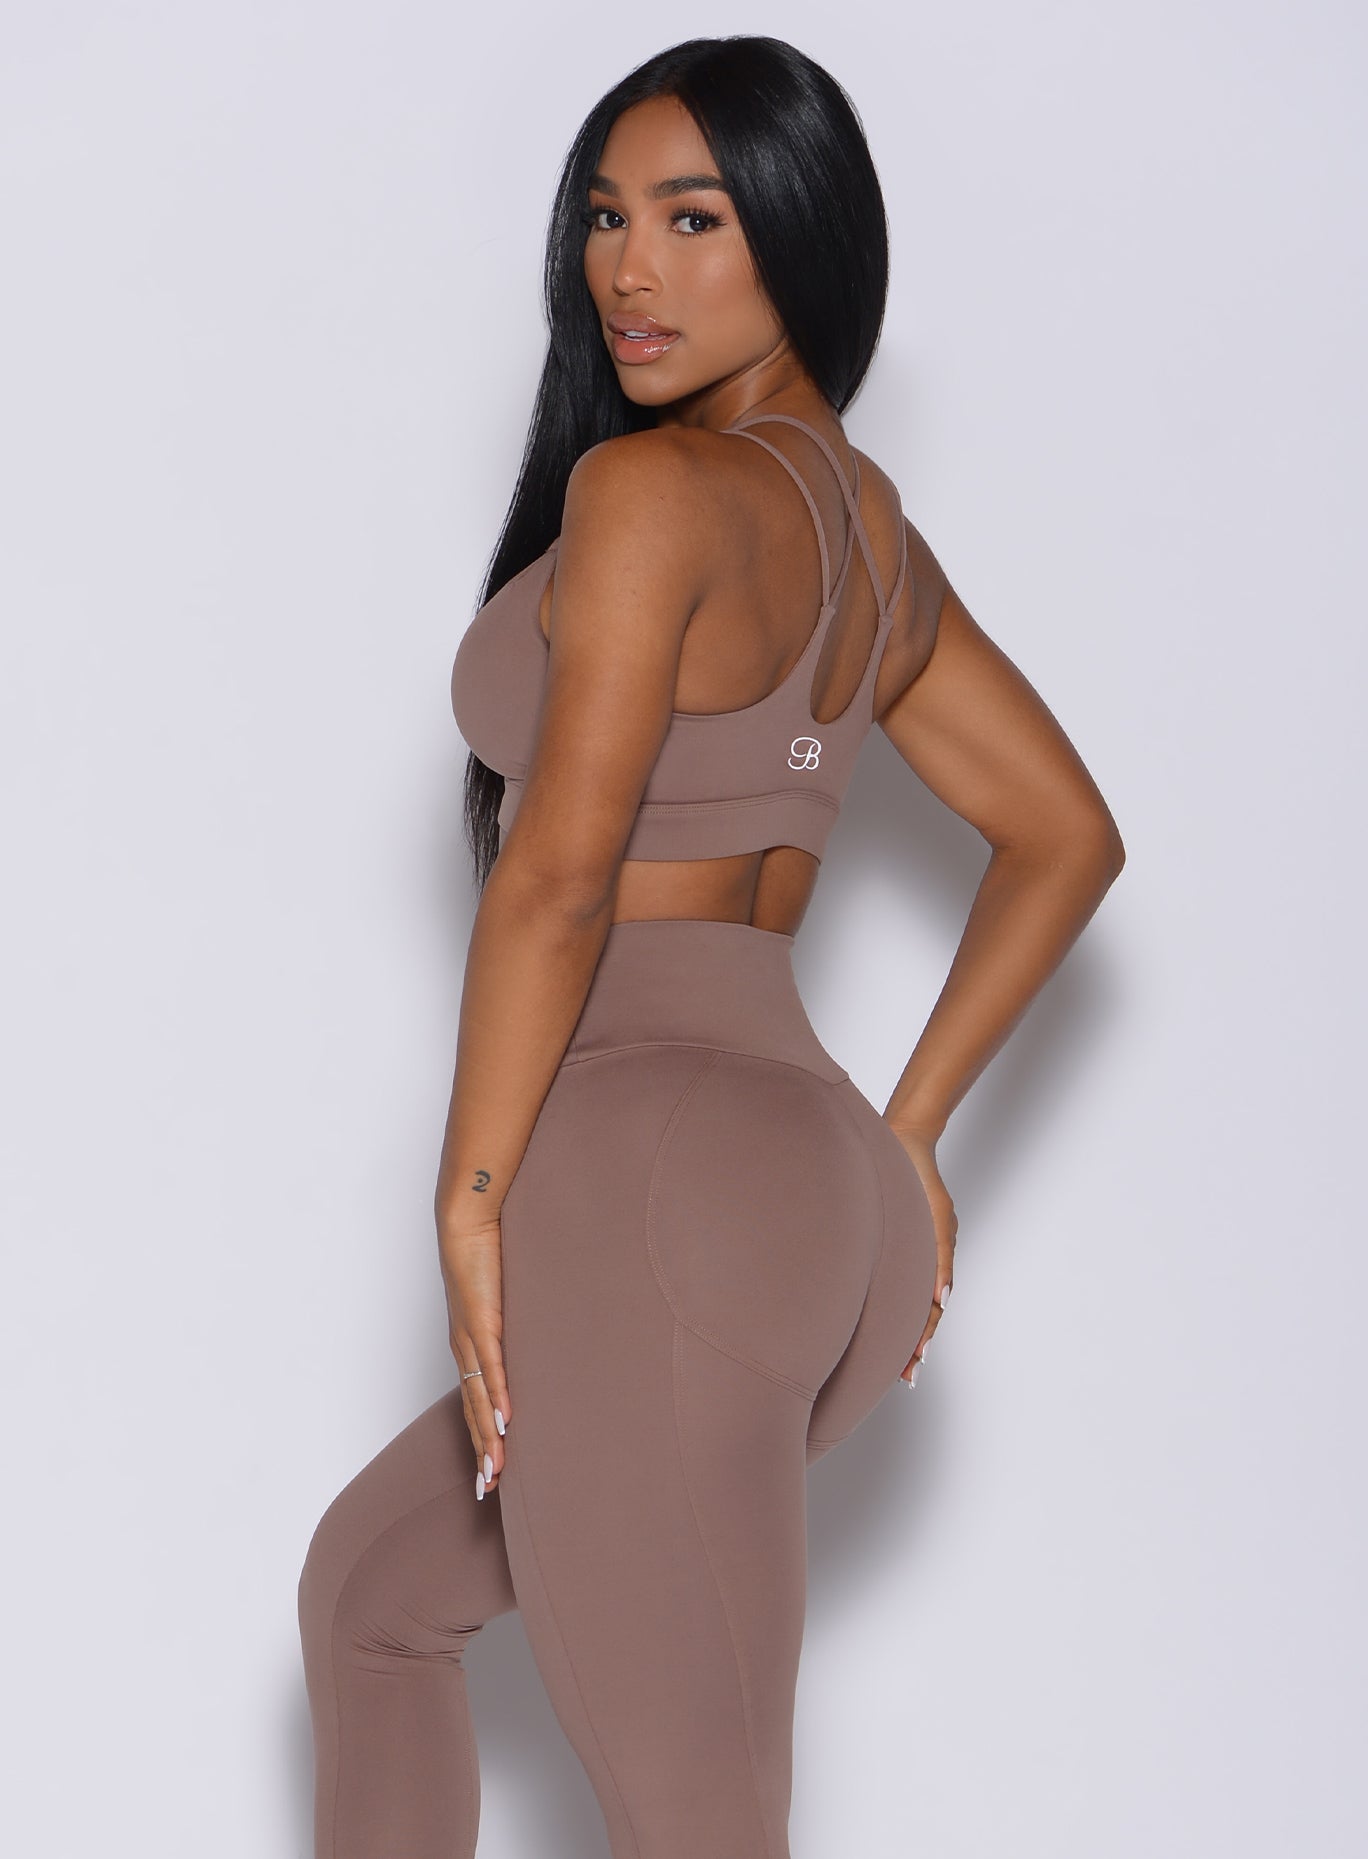 Left side profile view of a model facing to her left wearing our twist sports bra in tan color and a matching leggings